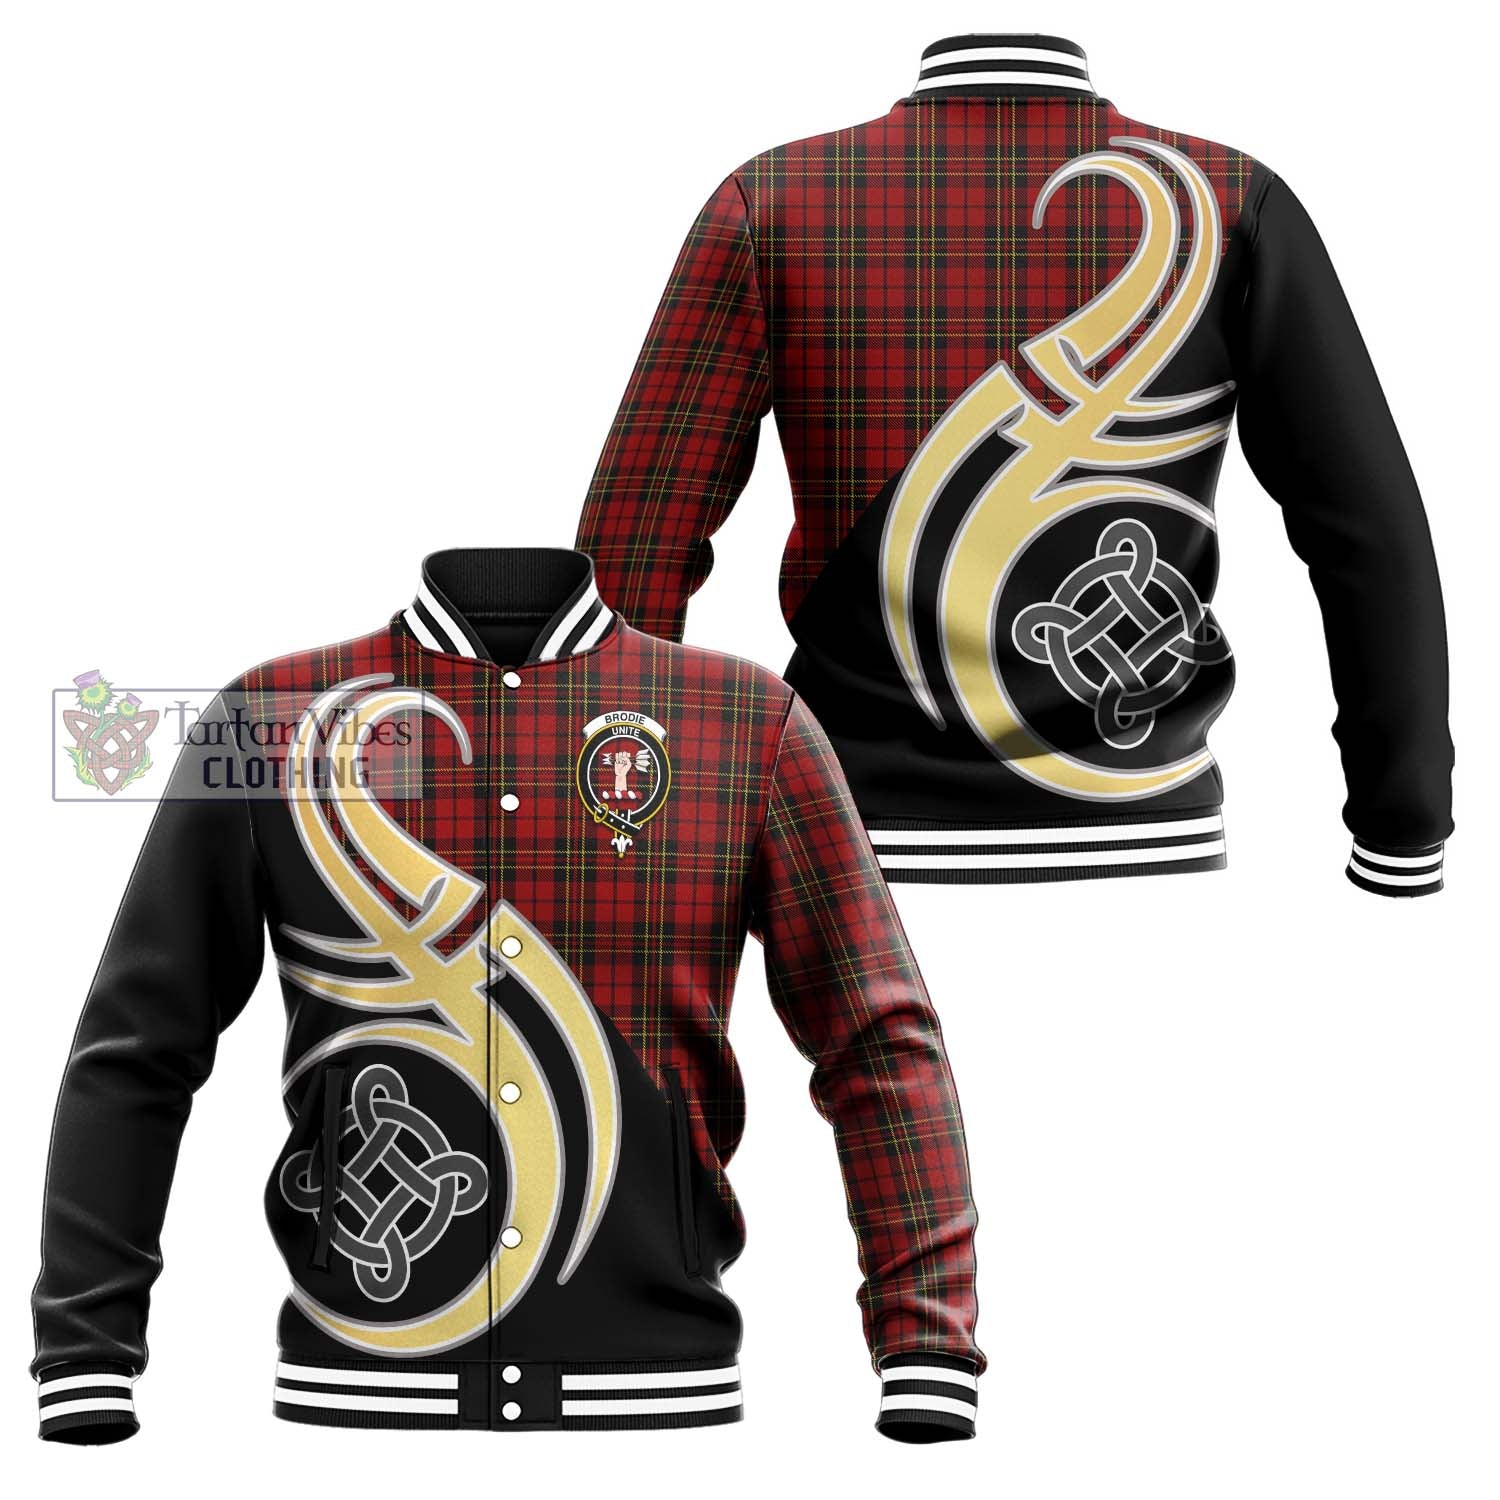 Tartan Vibes Clothing Brodie Tartan Baseball Jacket with Family Crest and Celtic Symbol Style